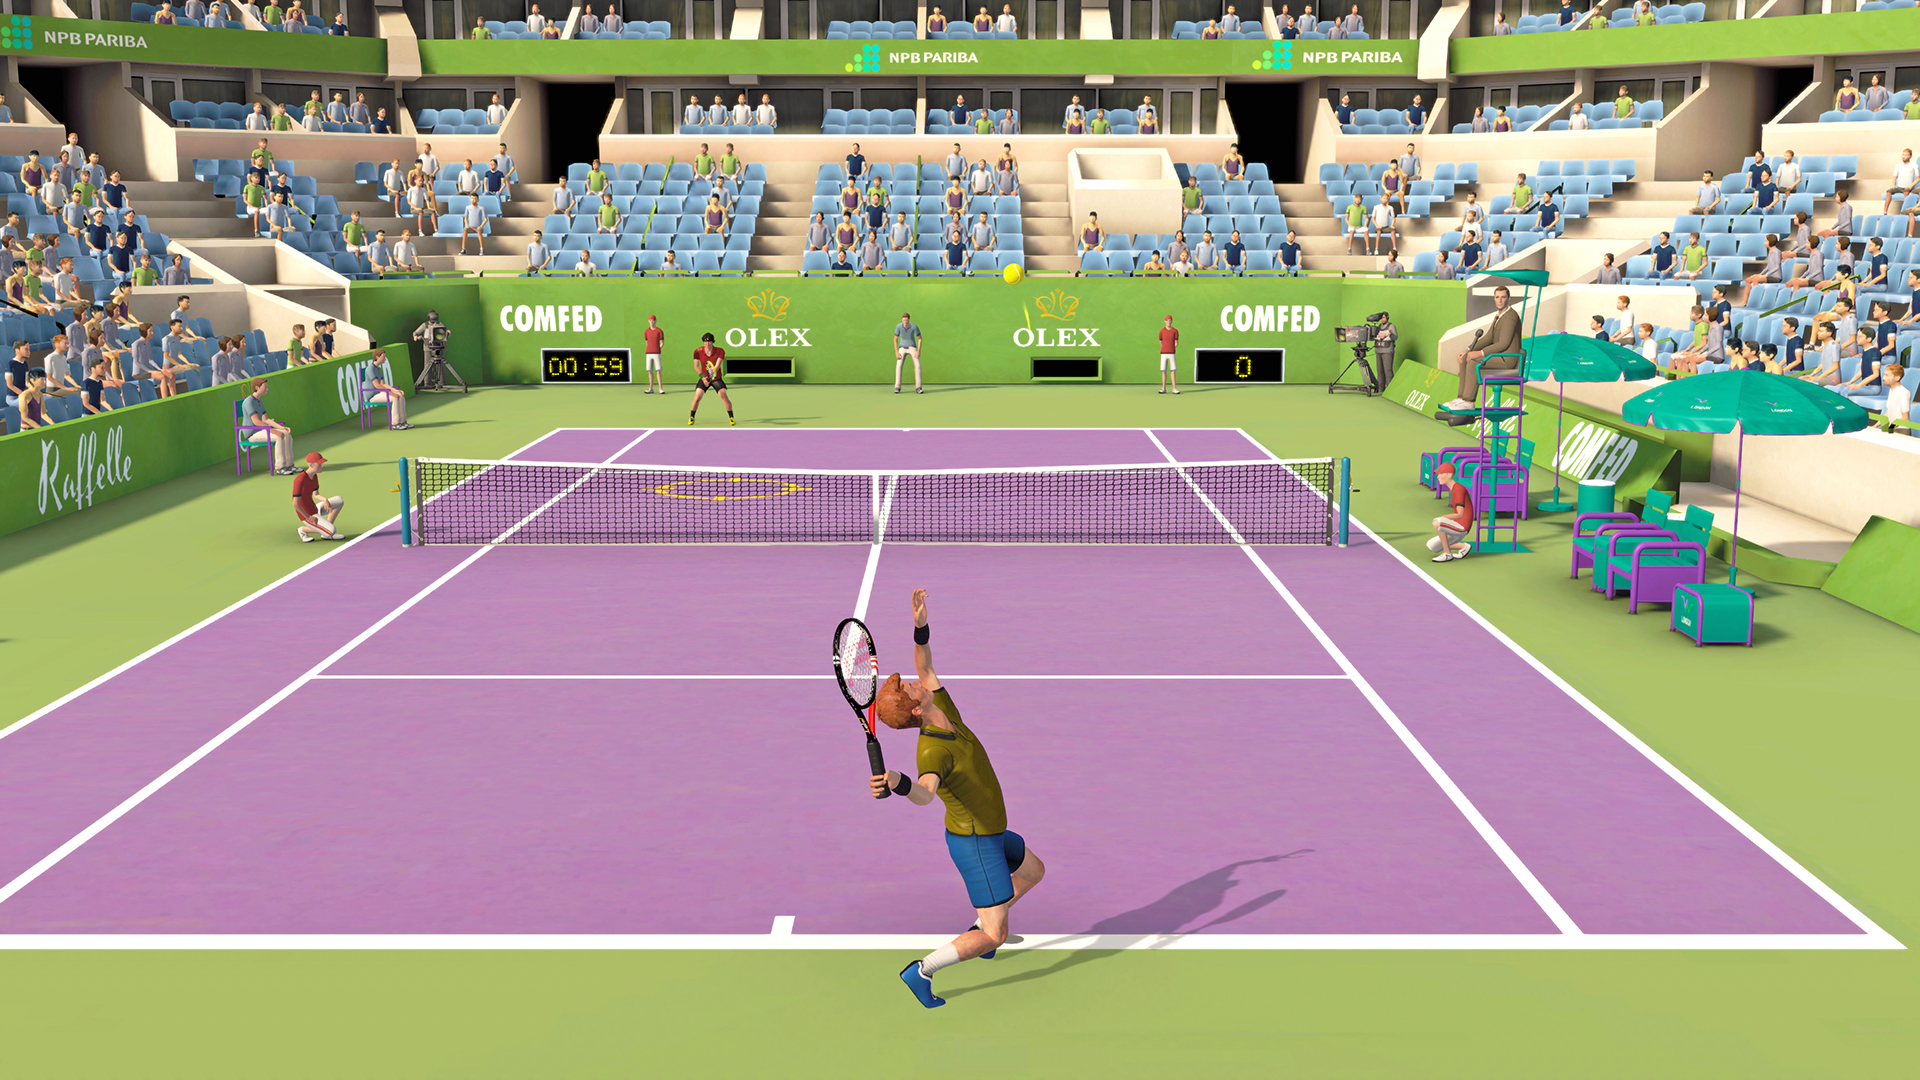 Save 20% on First Person Tennis - The Real Tennis Simulator on Steam